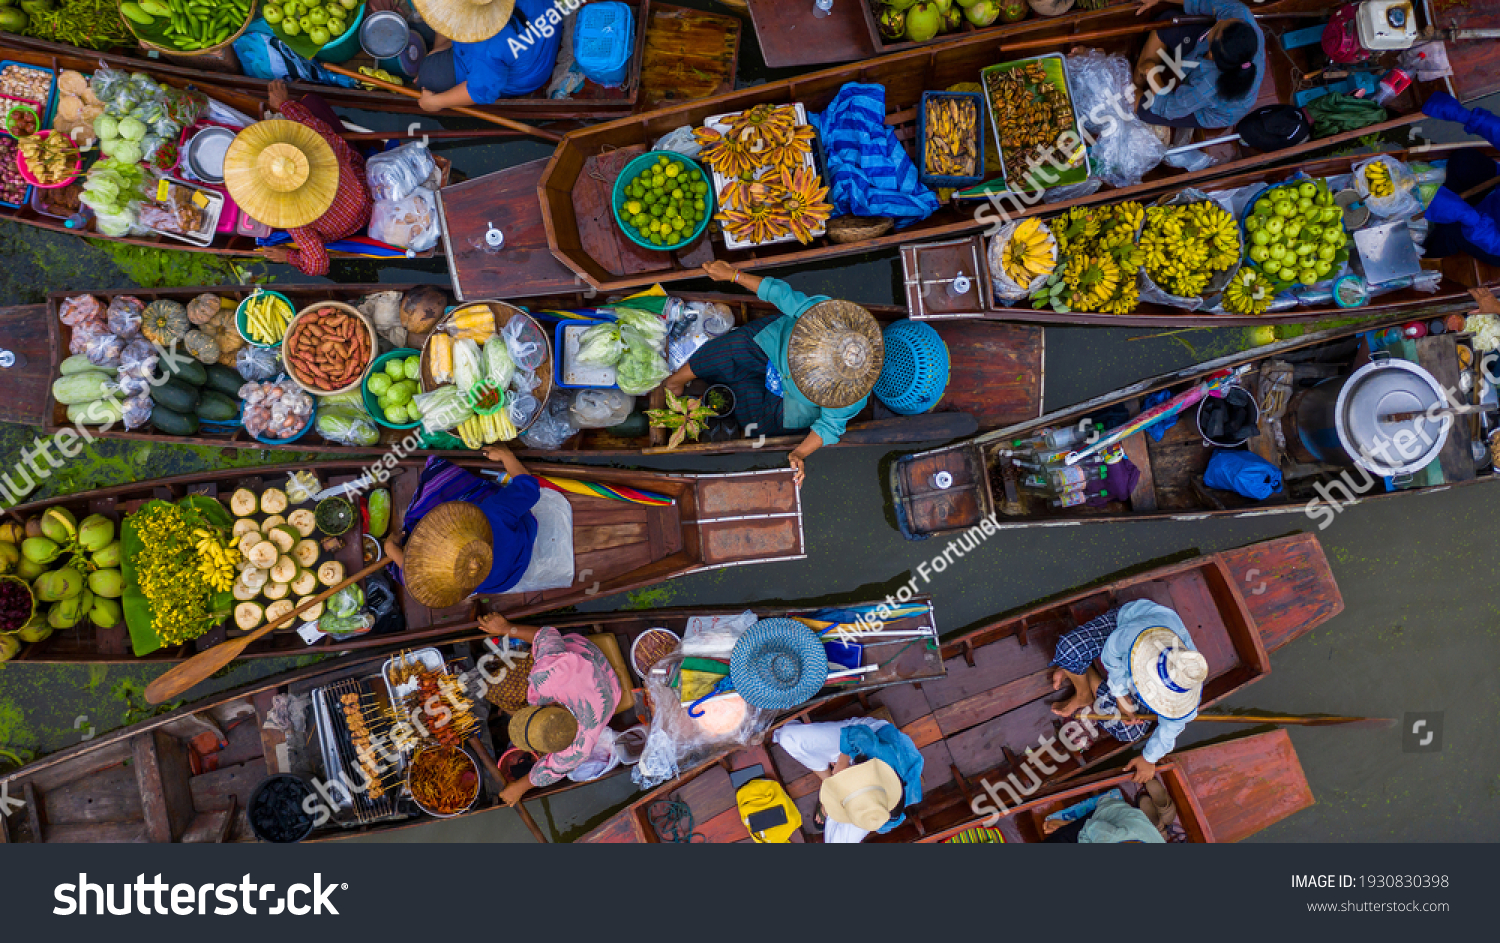 Aerial view famous floating market in Thailand, Damnoen Saduak floating market, Farmer go to sell organic products, fruits, vegetables and Thai cuisine, Tourists visiting by boat, Ratchaburi, Thailand #1930830398